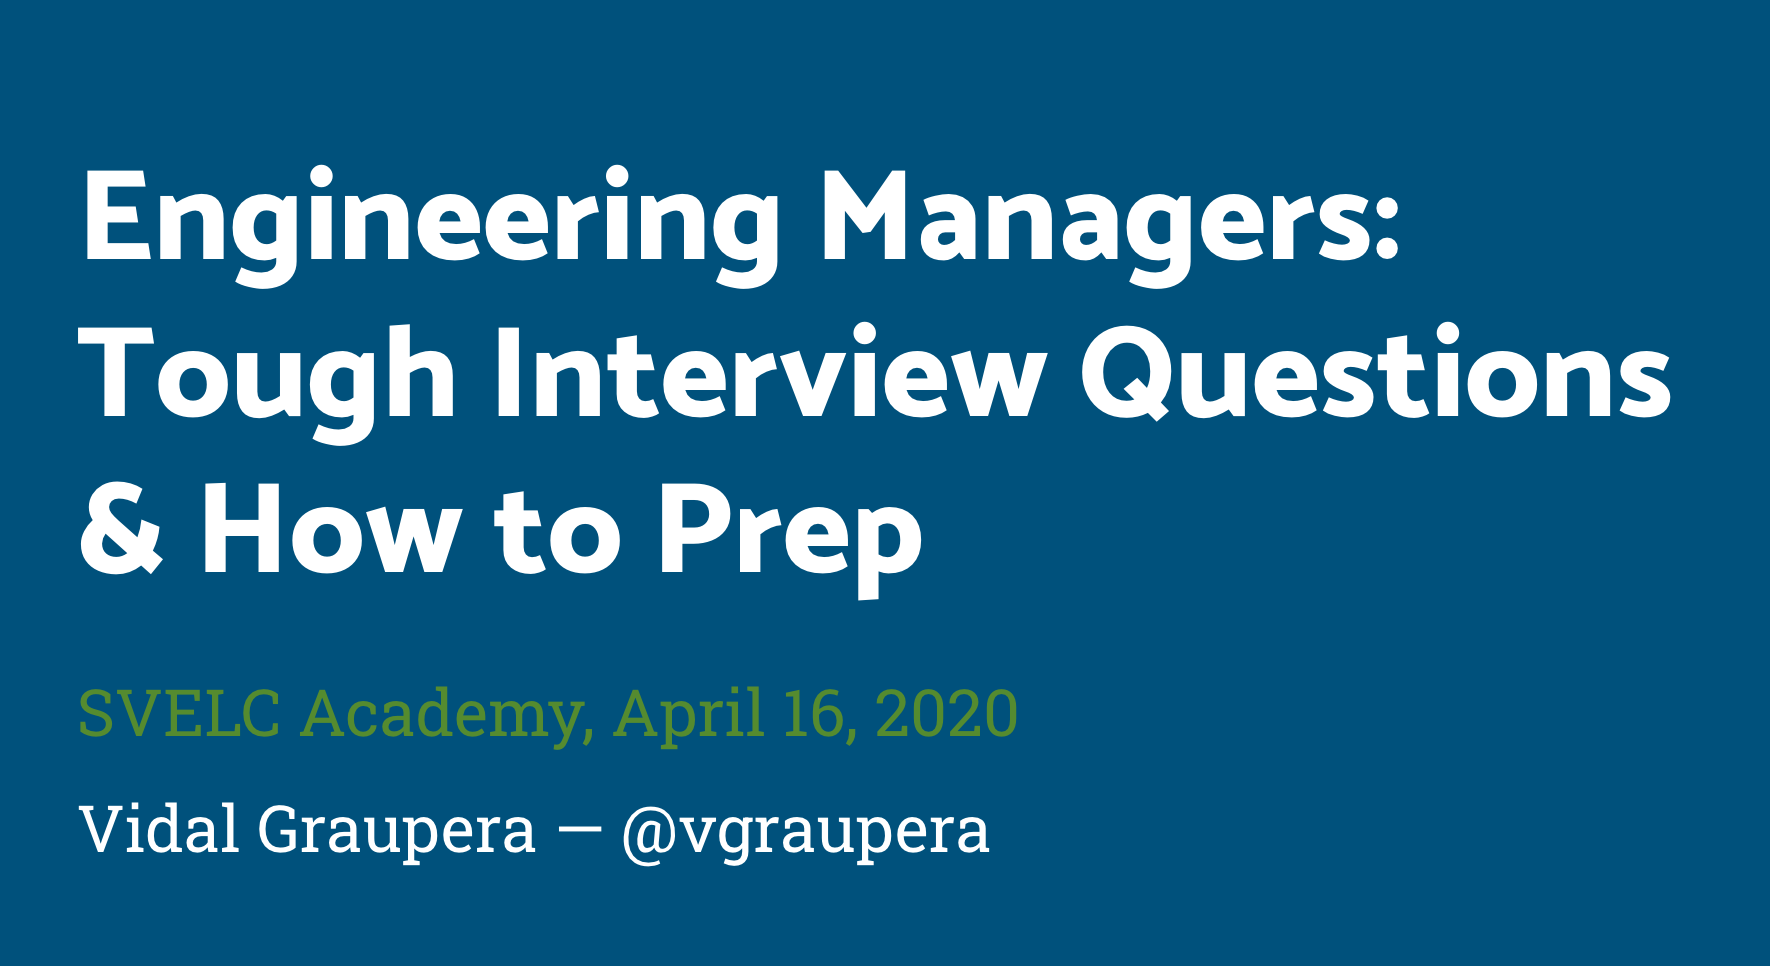 image for Video and Slides from “Tough Interview Questions & How to Prep”